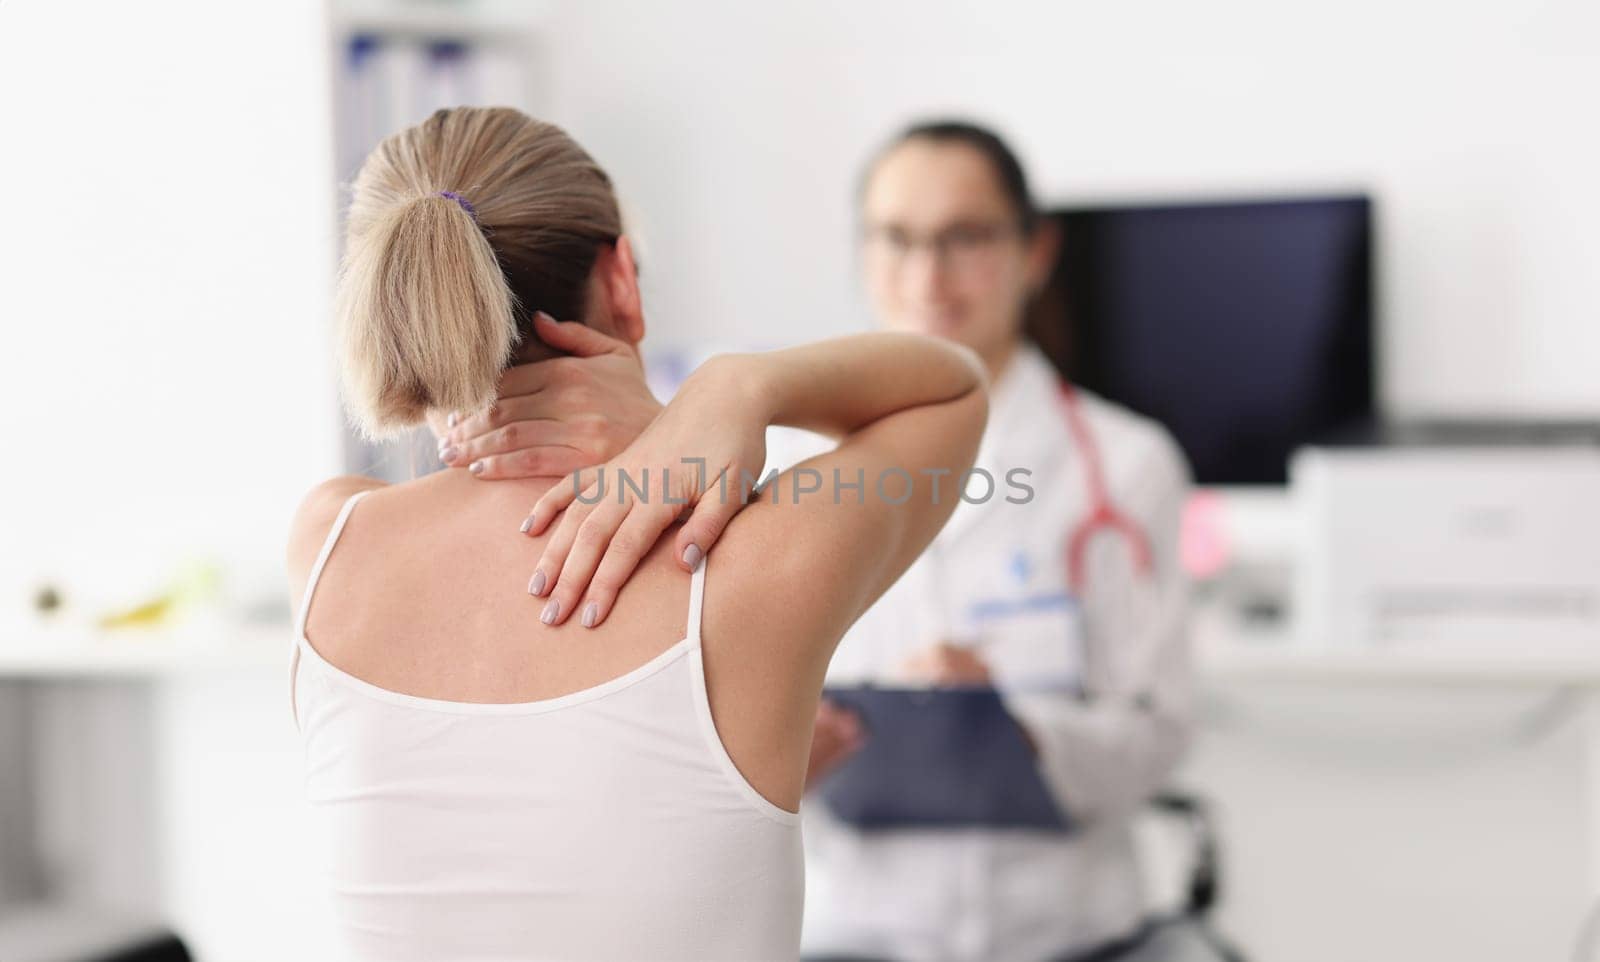 Patient with back pain problems at doctor's appointment. Vertebral hernia examination and treatment concept